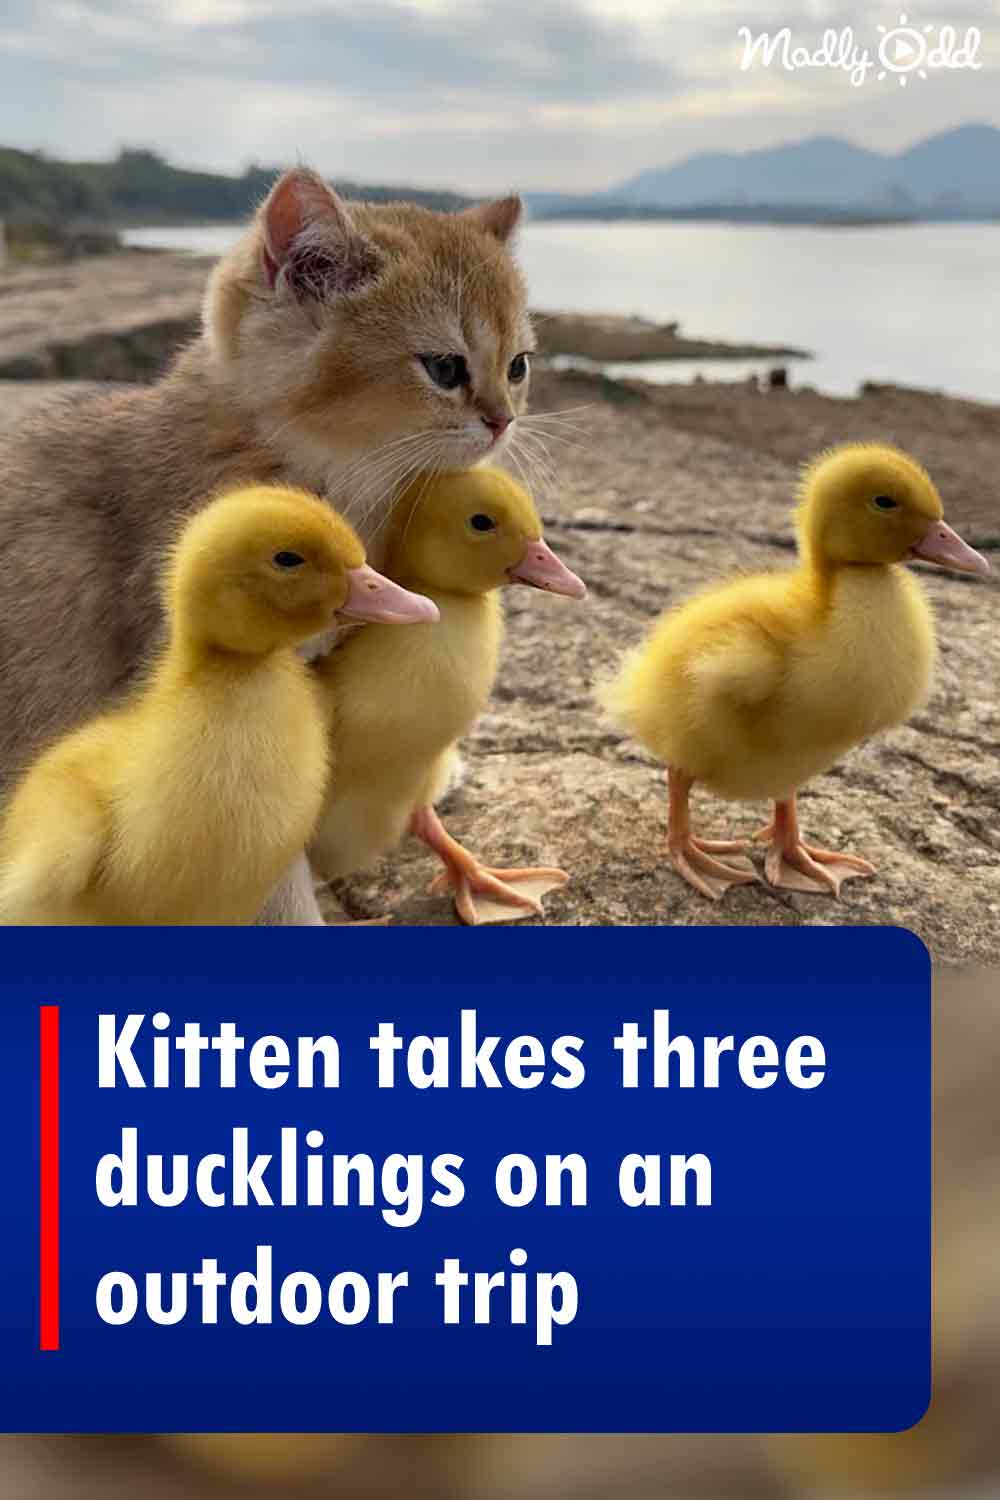 Kitten takes three ducklings on an outdoor trip